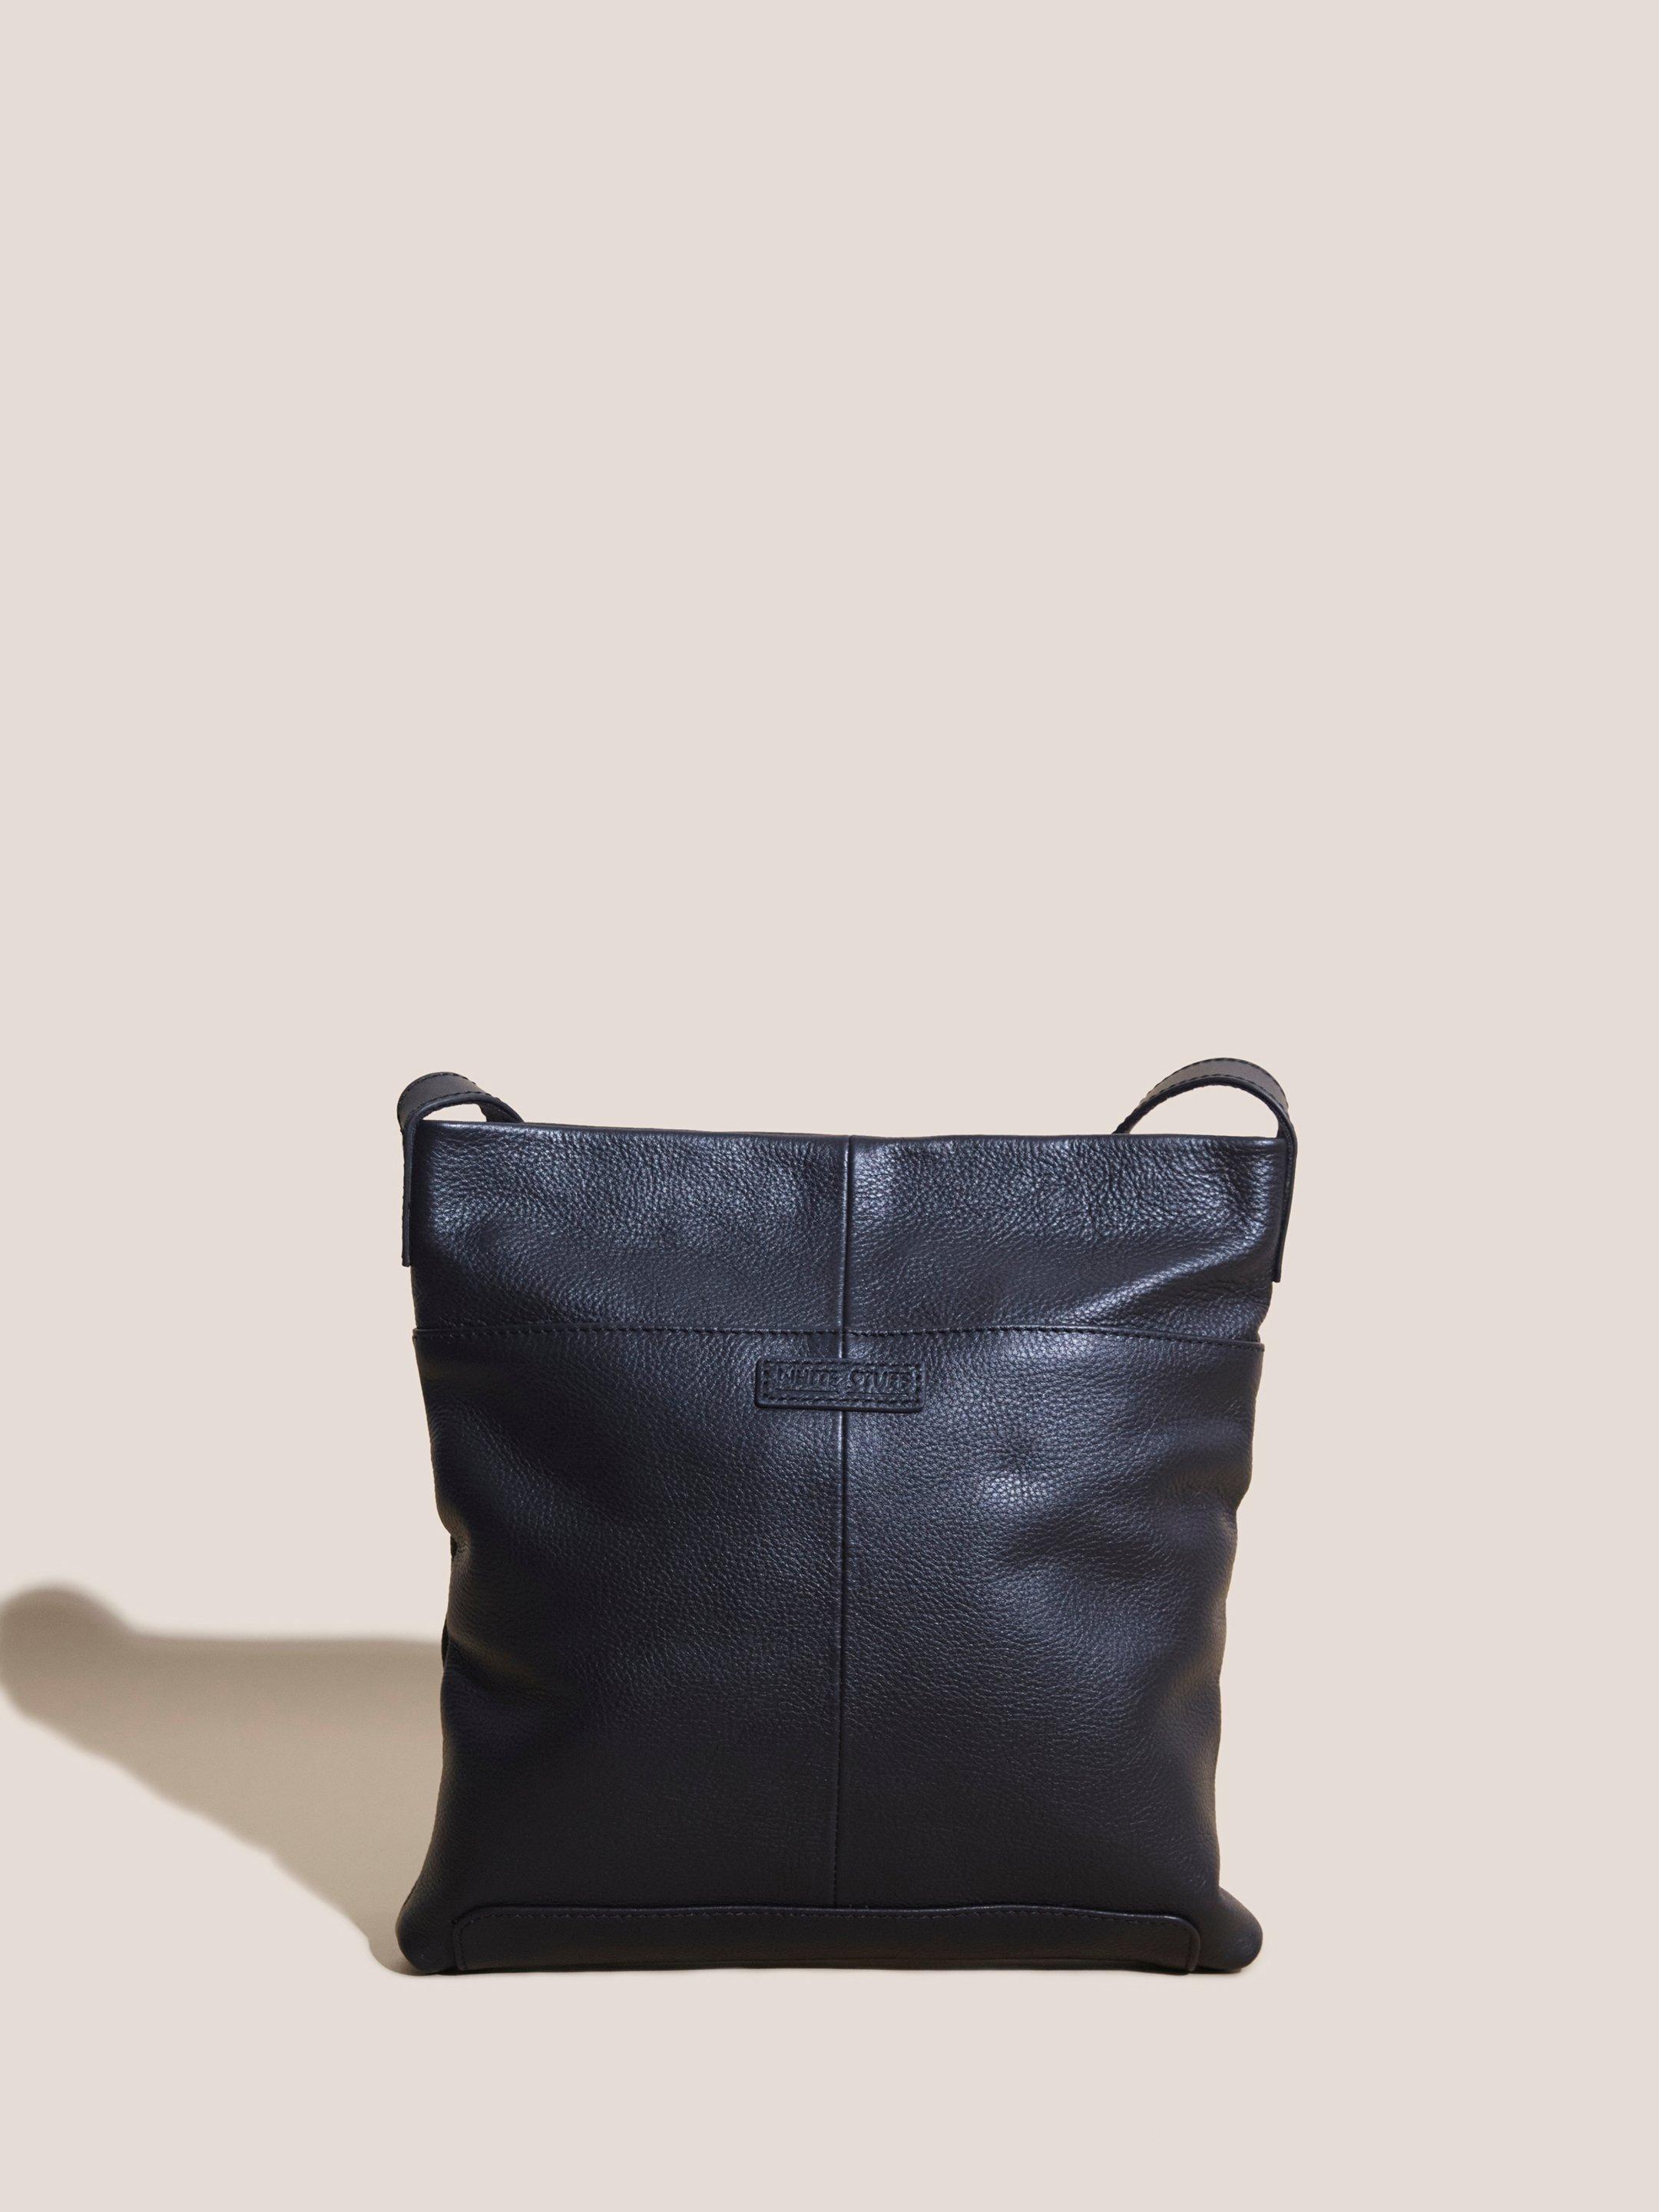 Issy Bag in PURE BLK - FLAT BACK